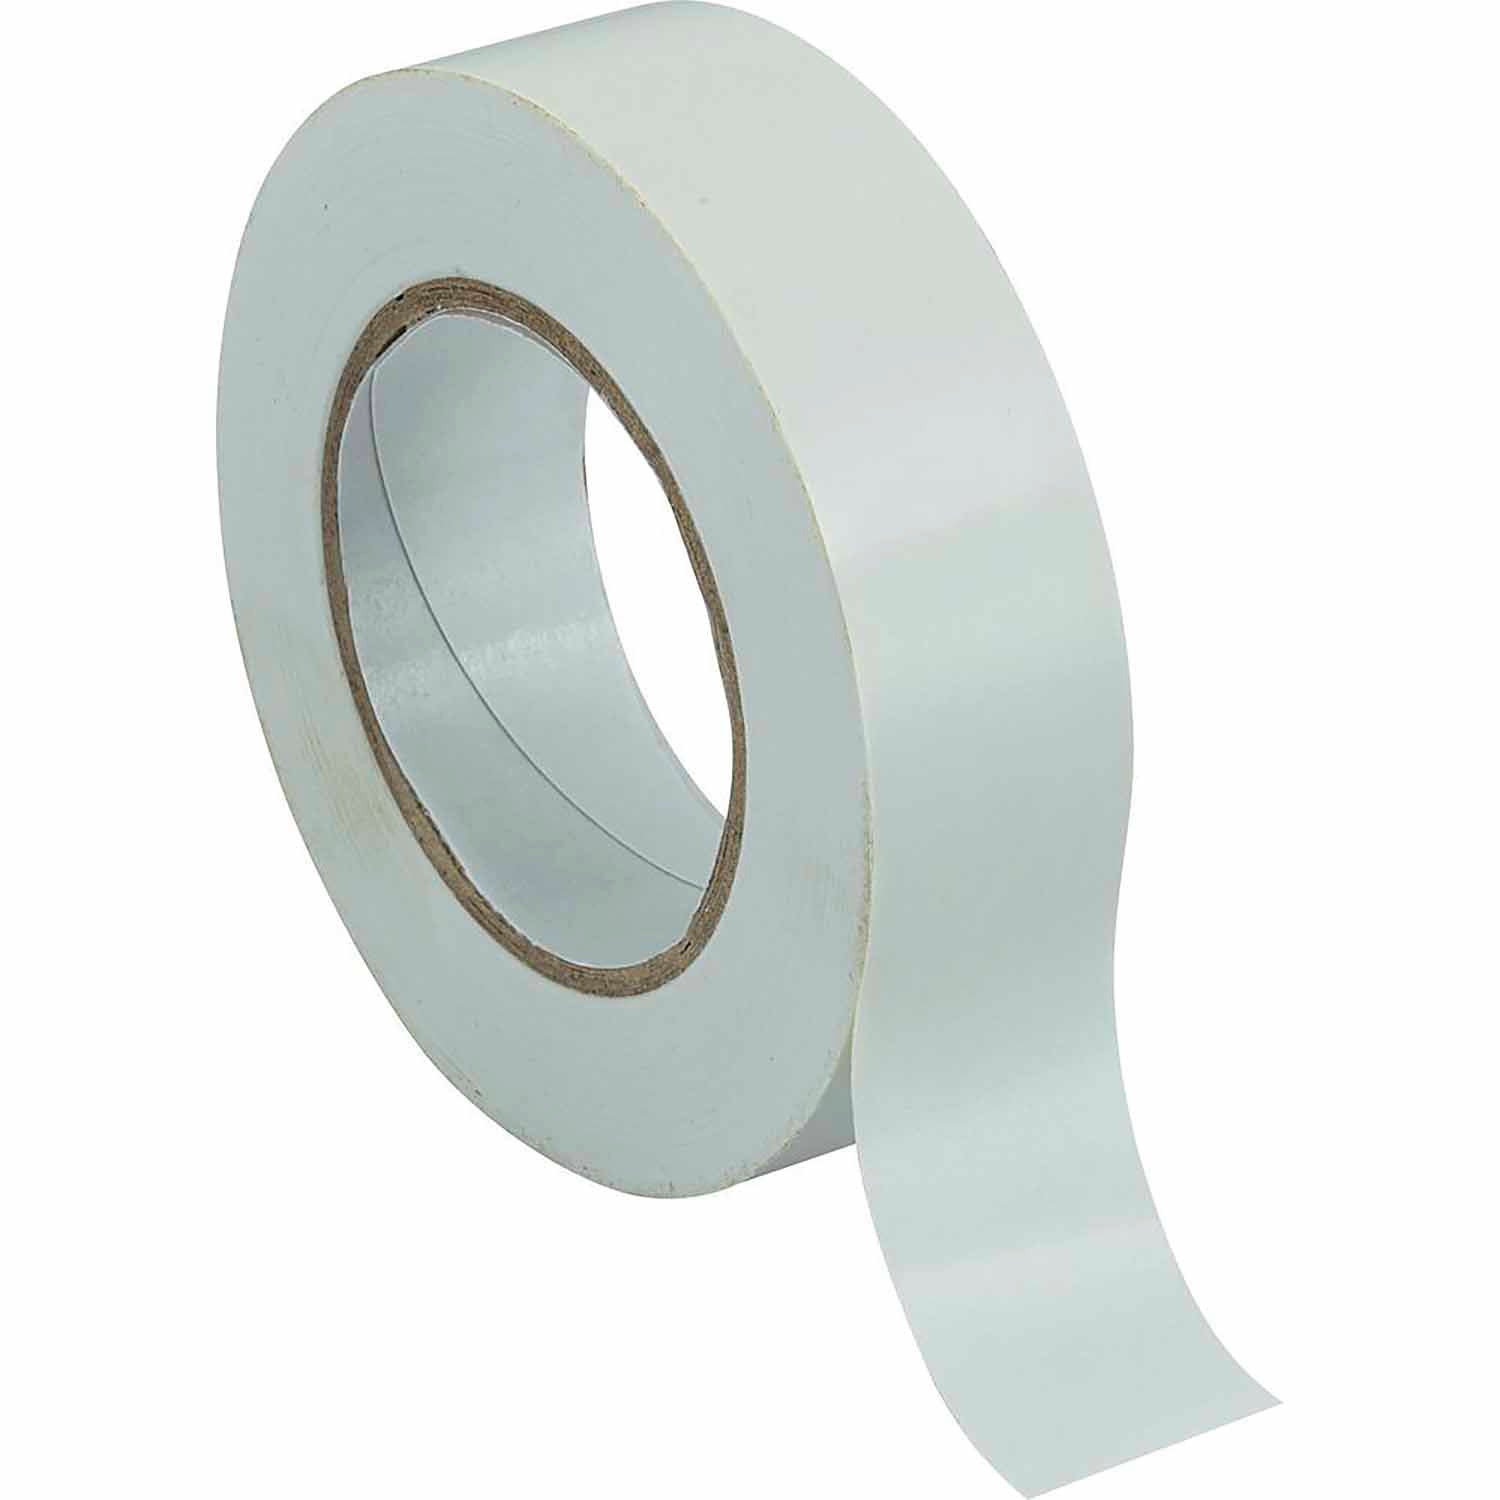 Plastic Tape for Bandages